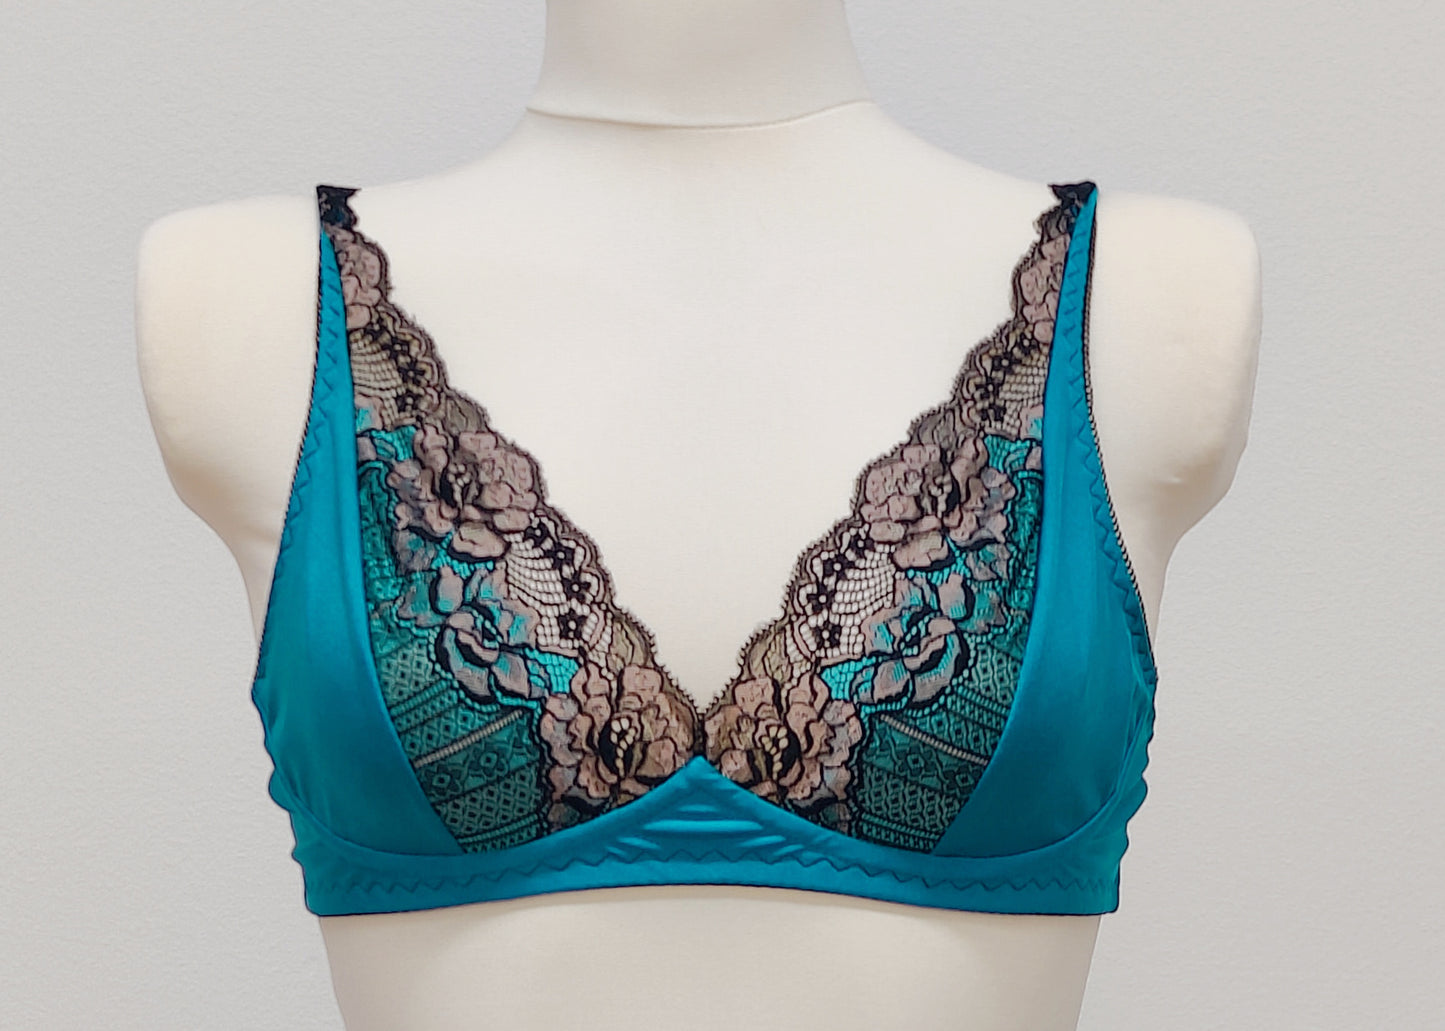 Two-tone Teal and Black soft cup lace bra COCO Bralette